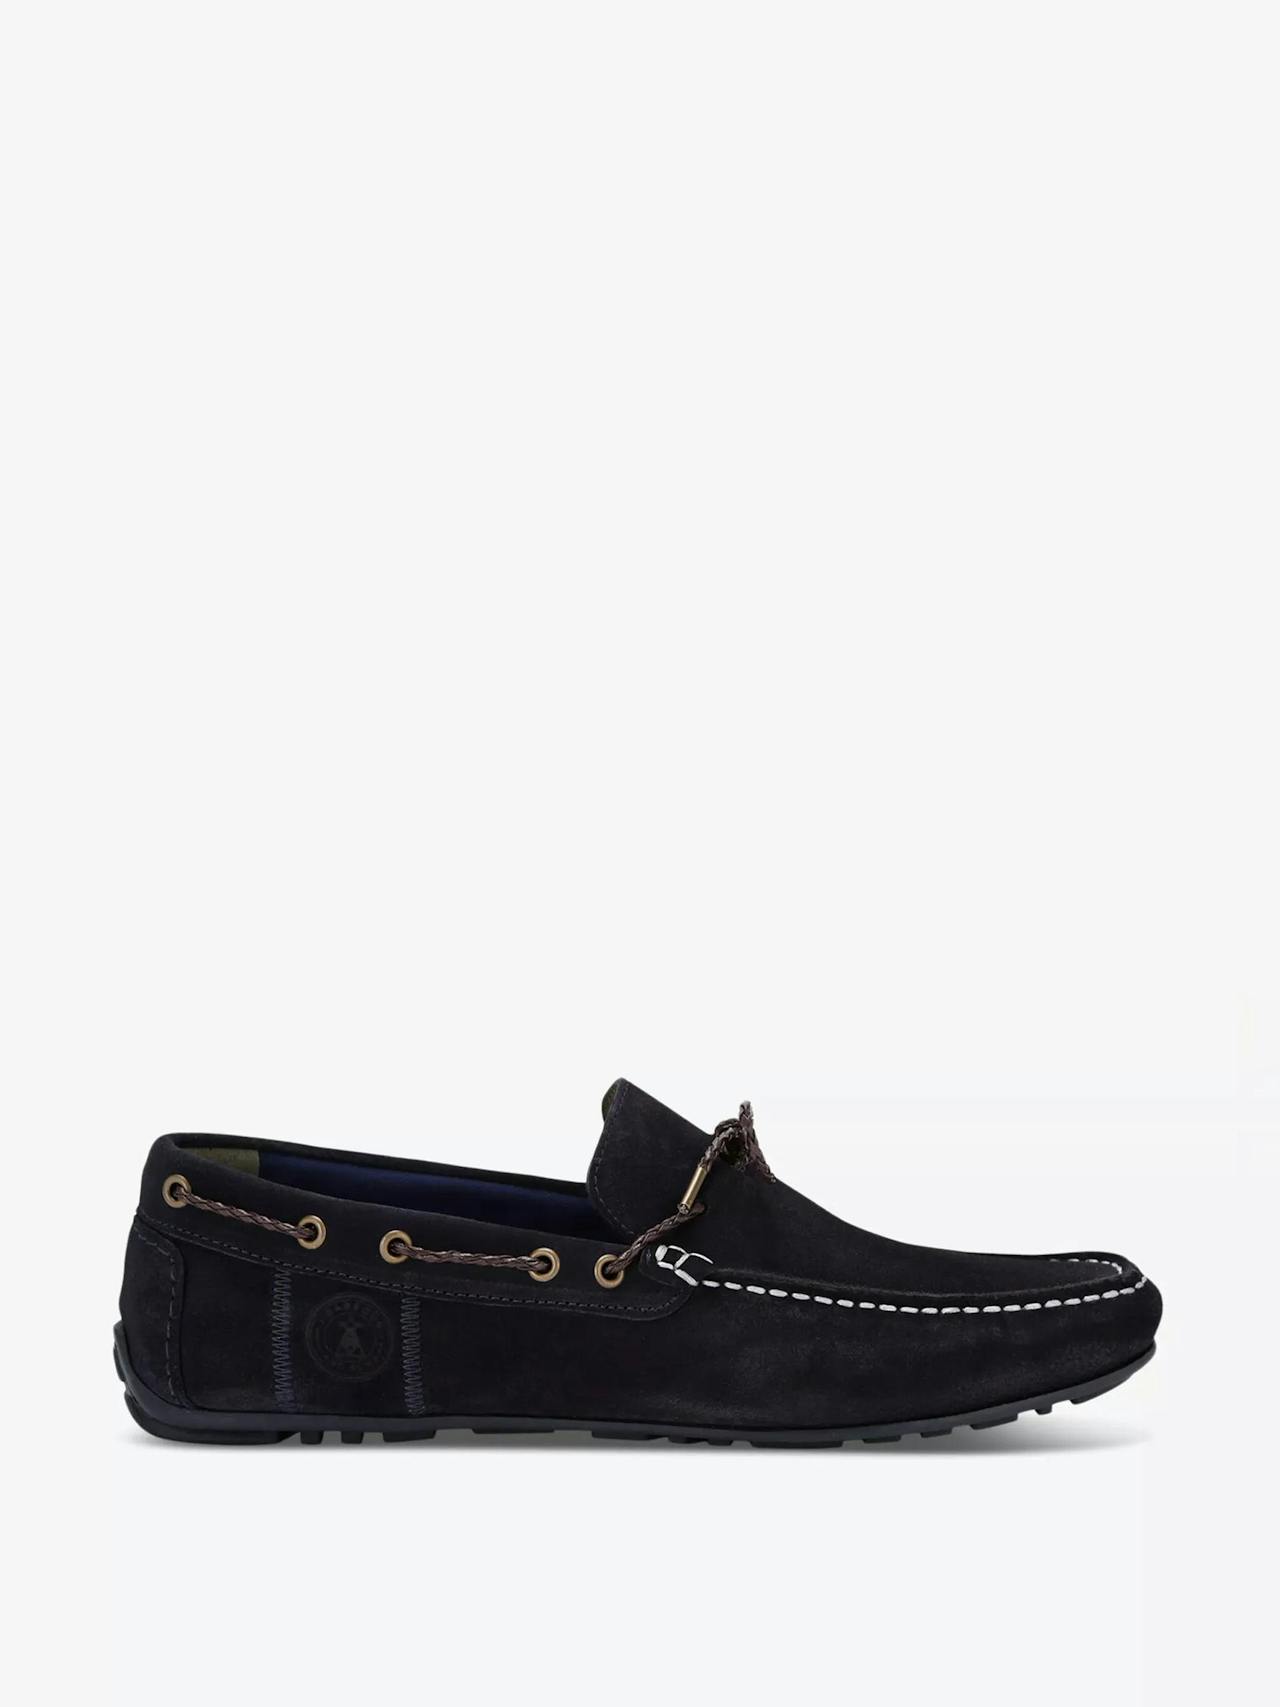 Jenson contrast-stitching leather driving shoes